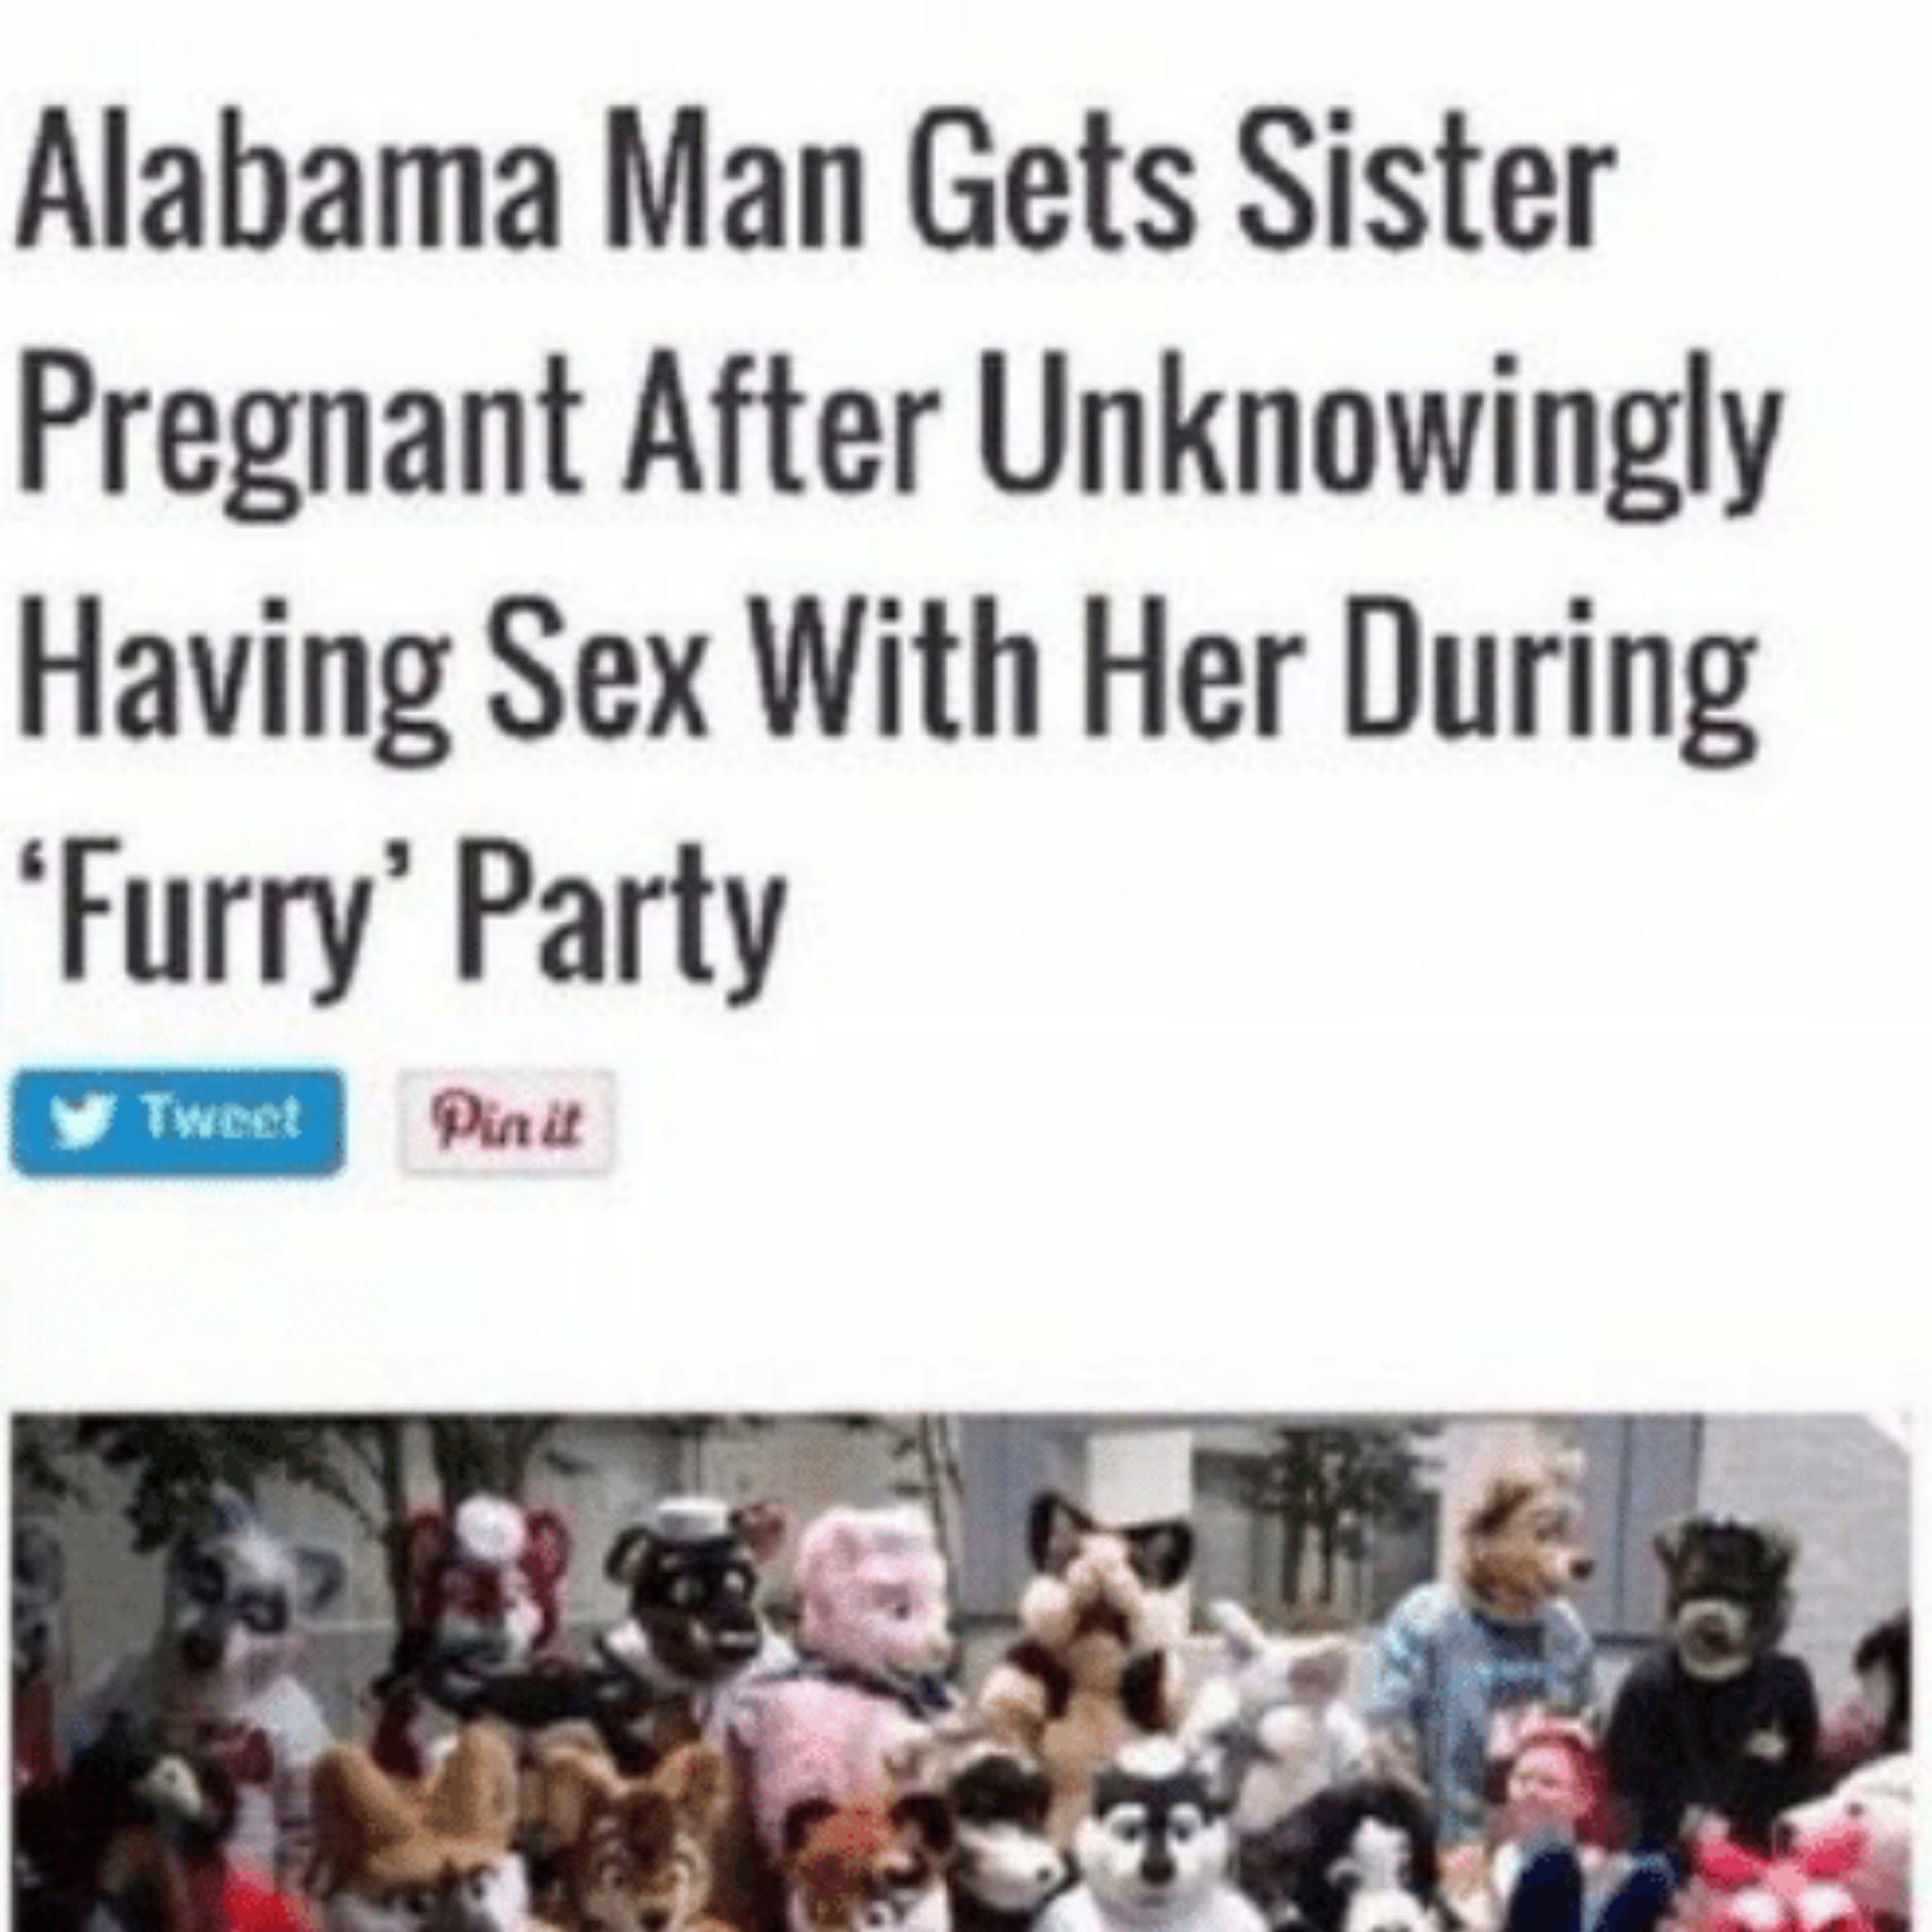 alabama sister - Alabama Man Gets Sister Pregnant After Unknowingly Having Sex With Her During 'Furry' Party Tweet Pinit